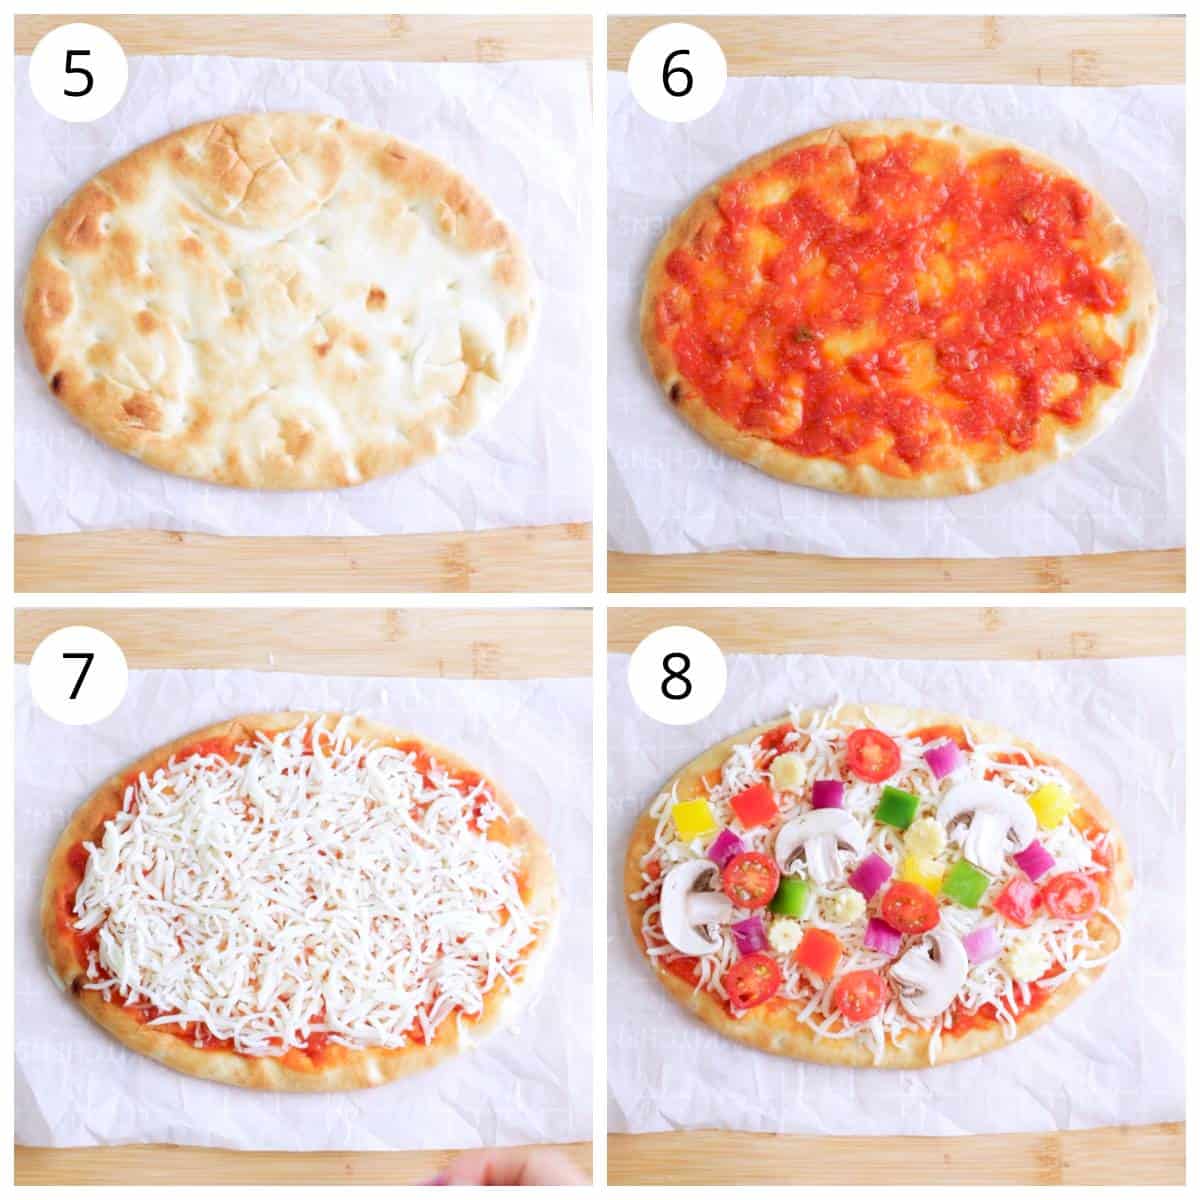 Steps for assembling the sauce, cheese and veggies on naan pizza